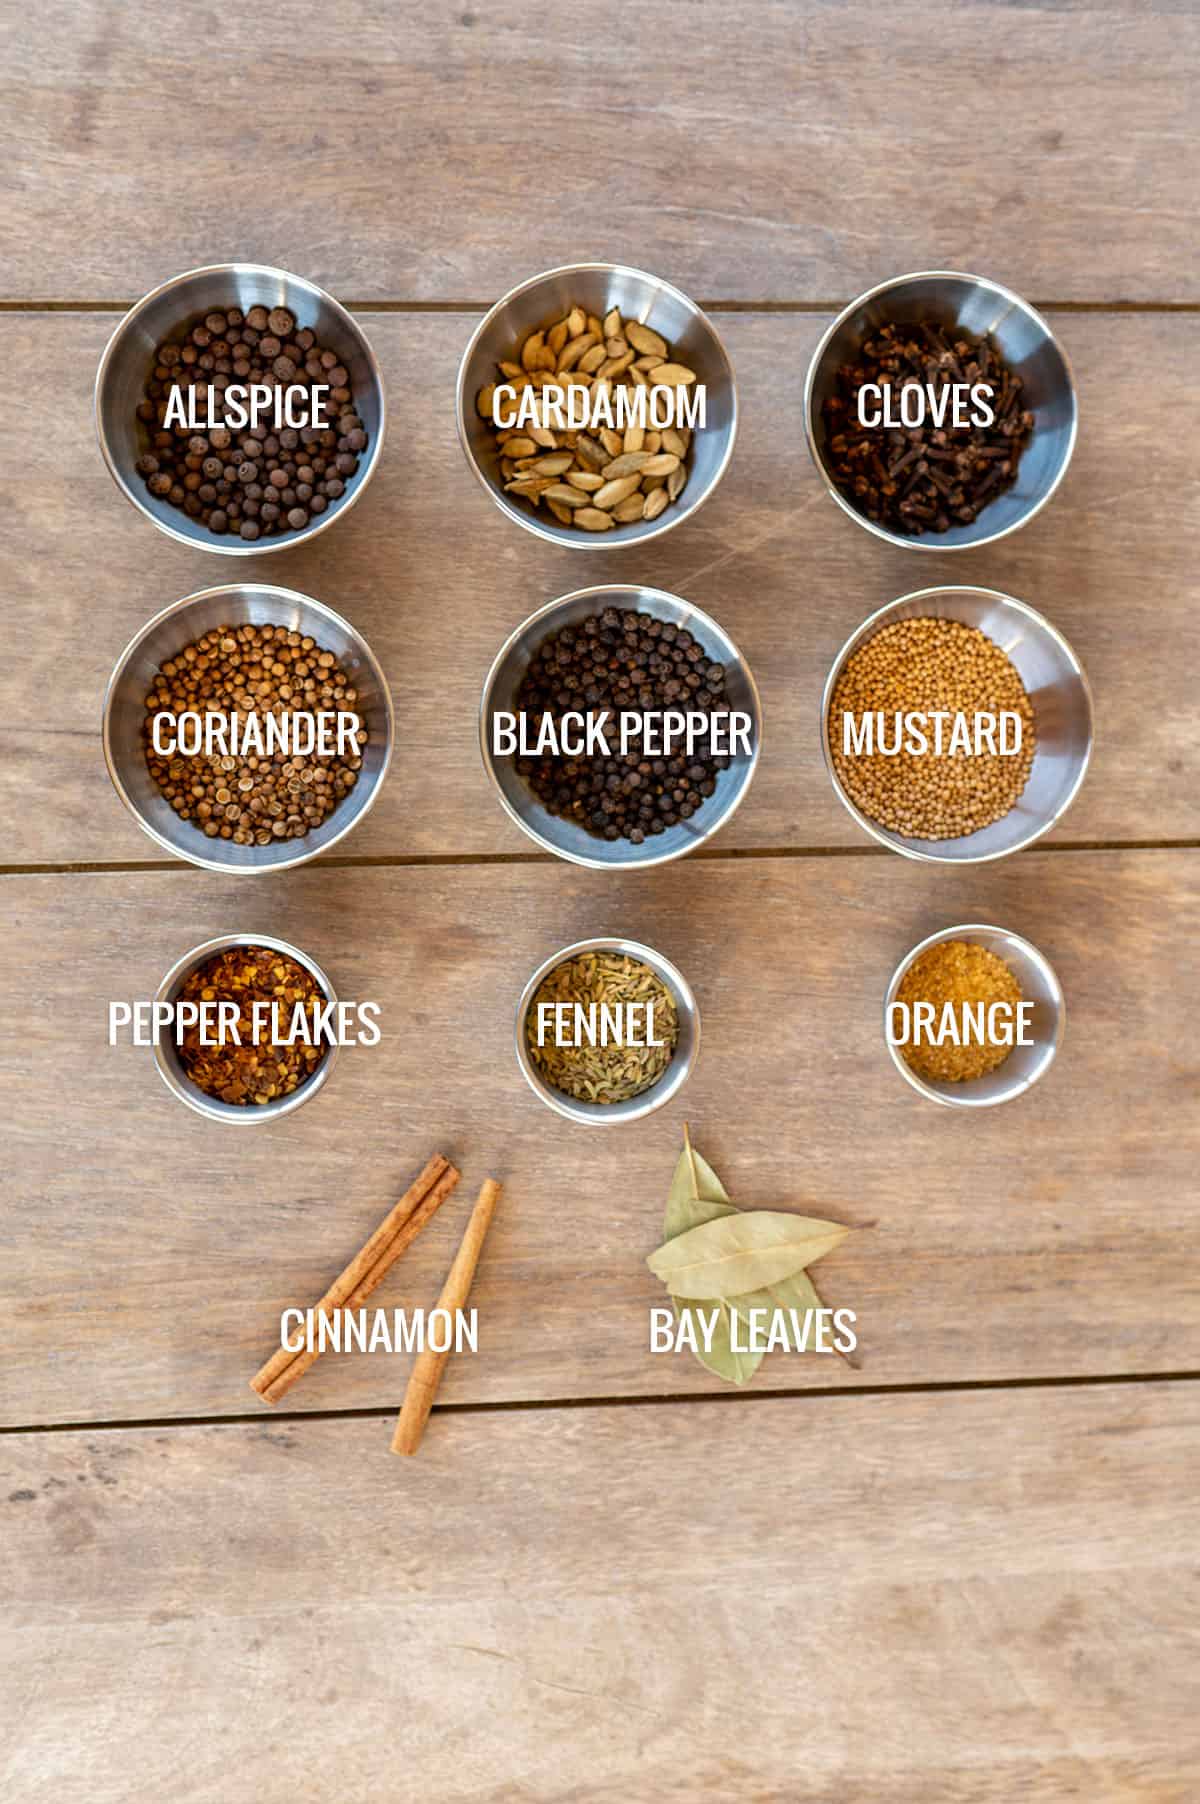 pickling spice ingredients laid out on counter.